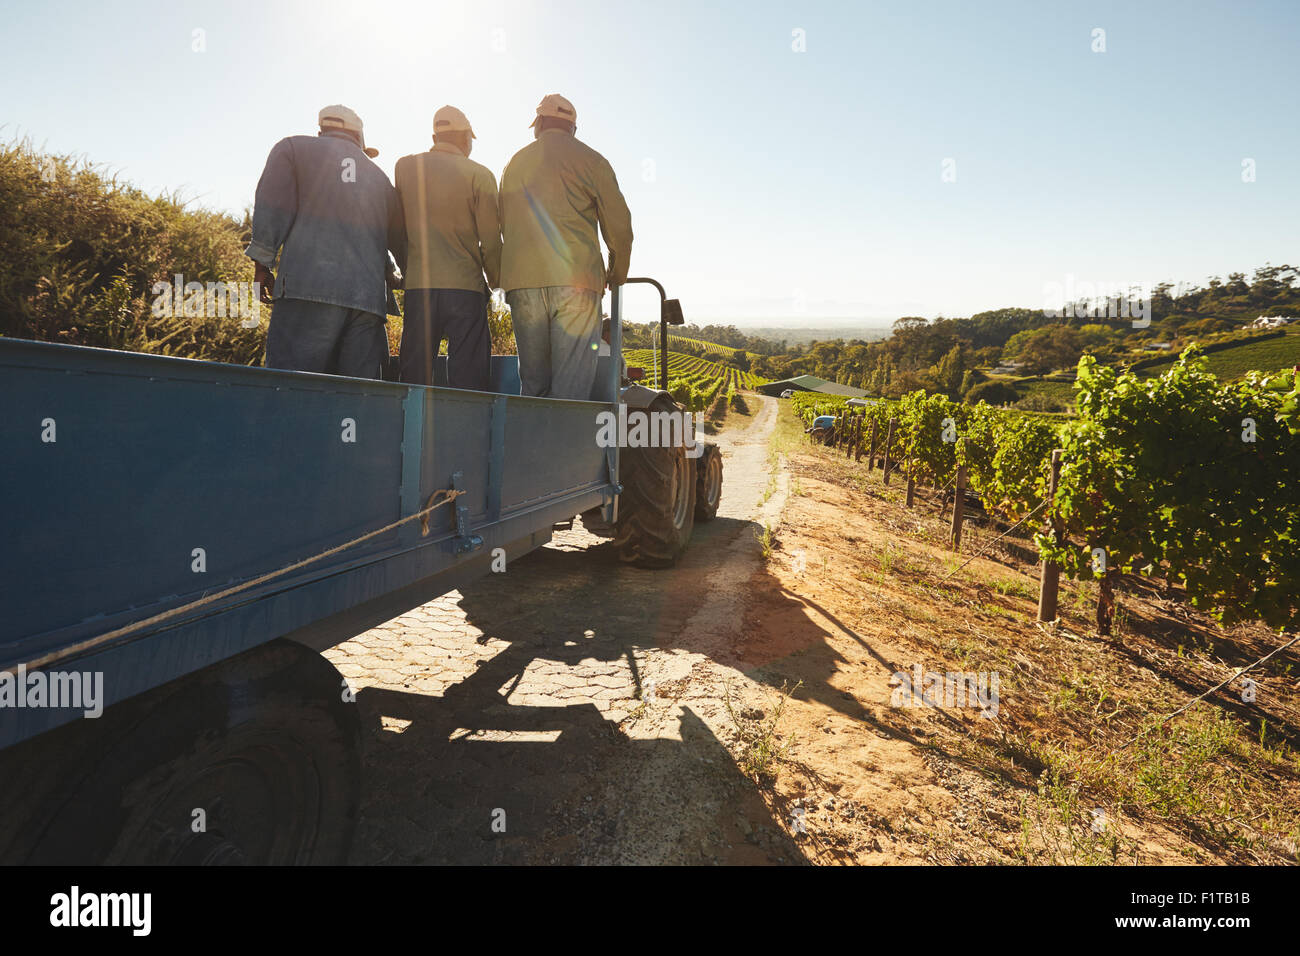 People riding in a tractor wagon through grape farms. Vineyard worker on a wagon ride at farm. Stock Photo